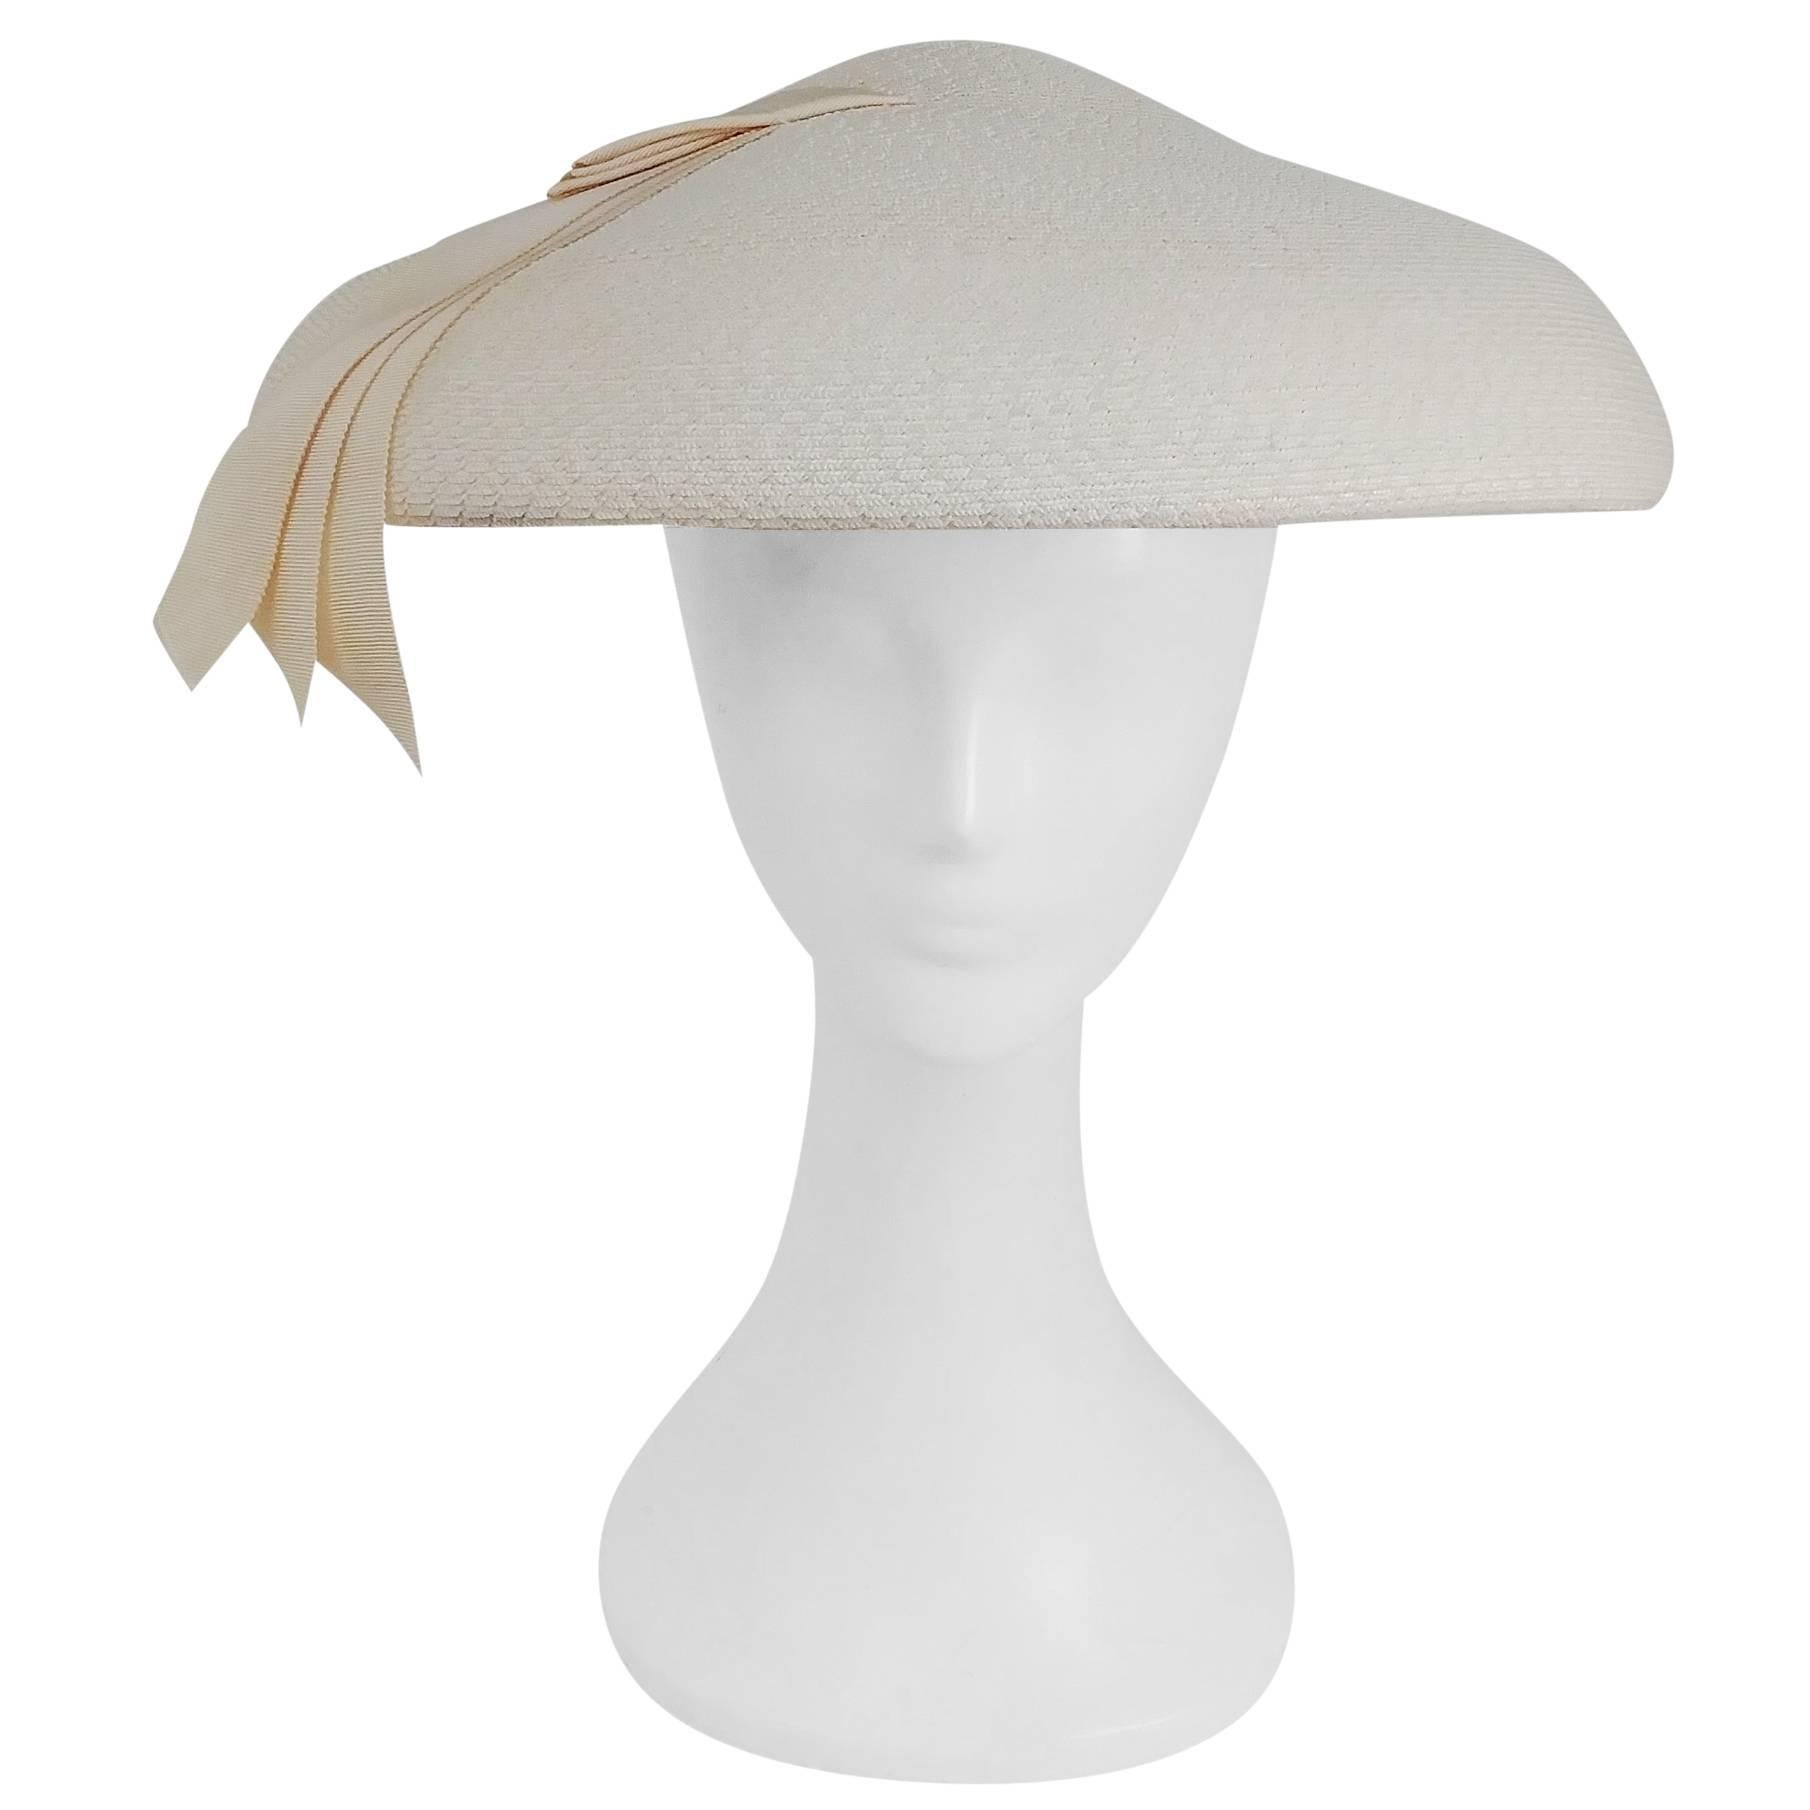 1950s New Look White Saucer Hat